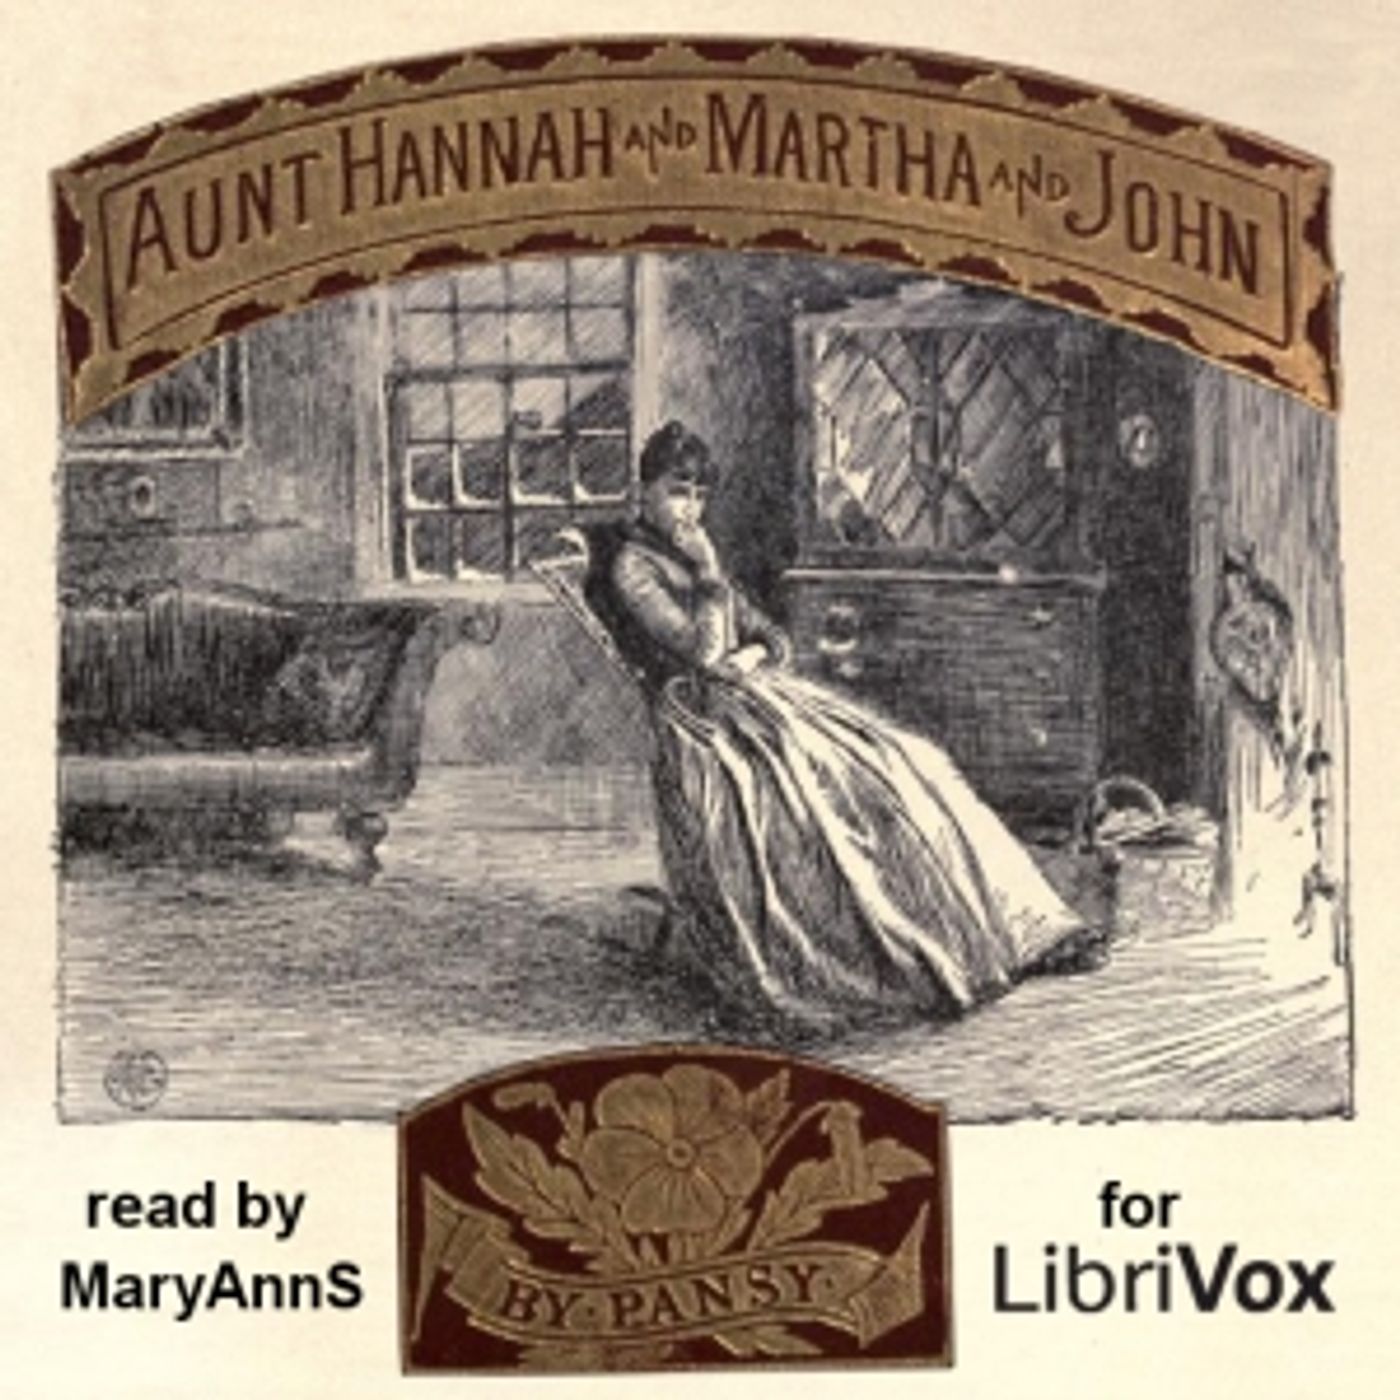 Aunt Hannah and Martha and John by Pansy (1841 – 1930) and Mrs. C. M. Livingston